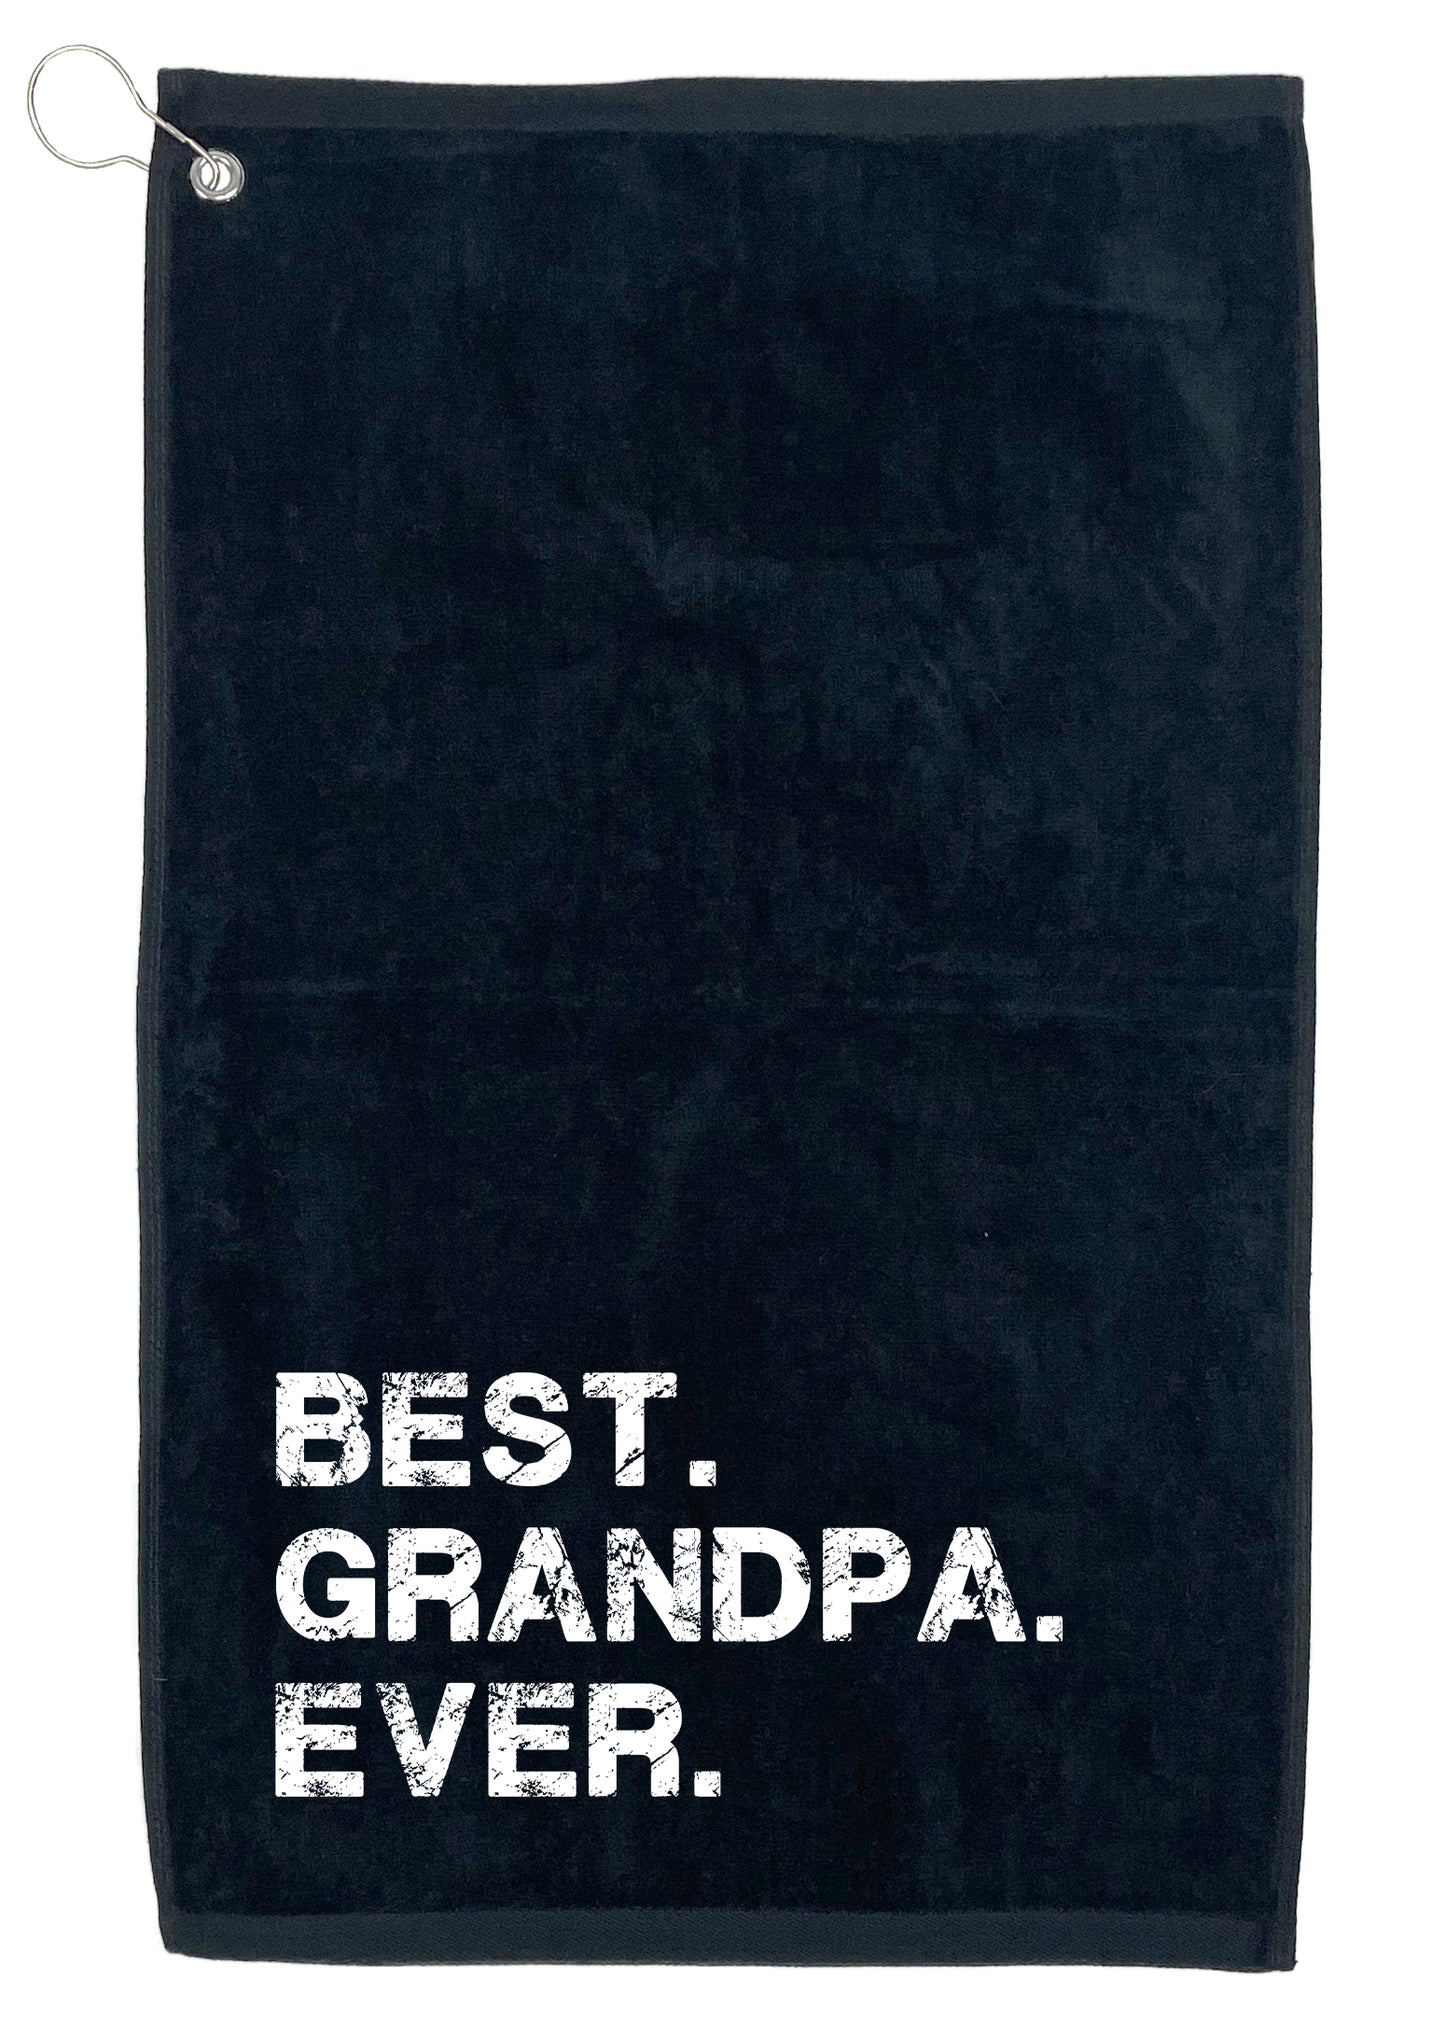 Best Grandpa Ever. Golf Towel - Funny T Shirts & Graphic Tees